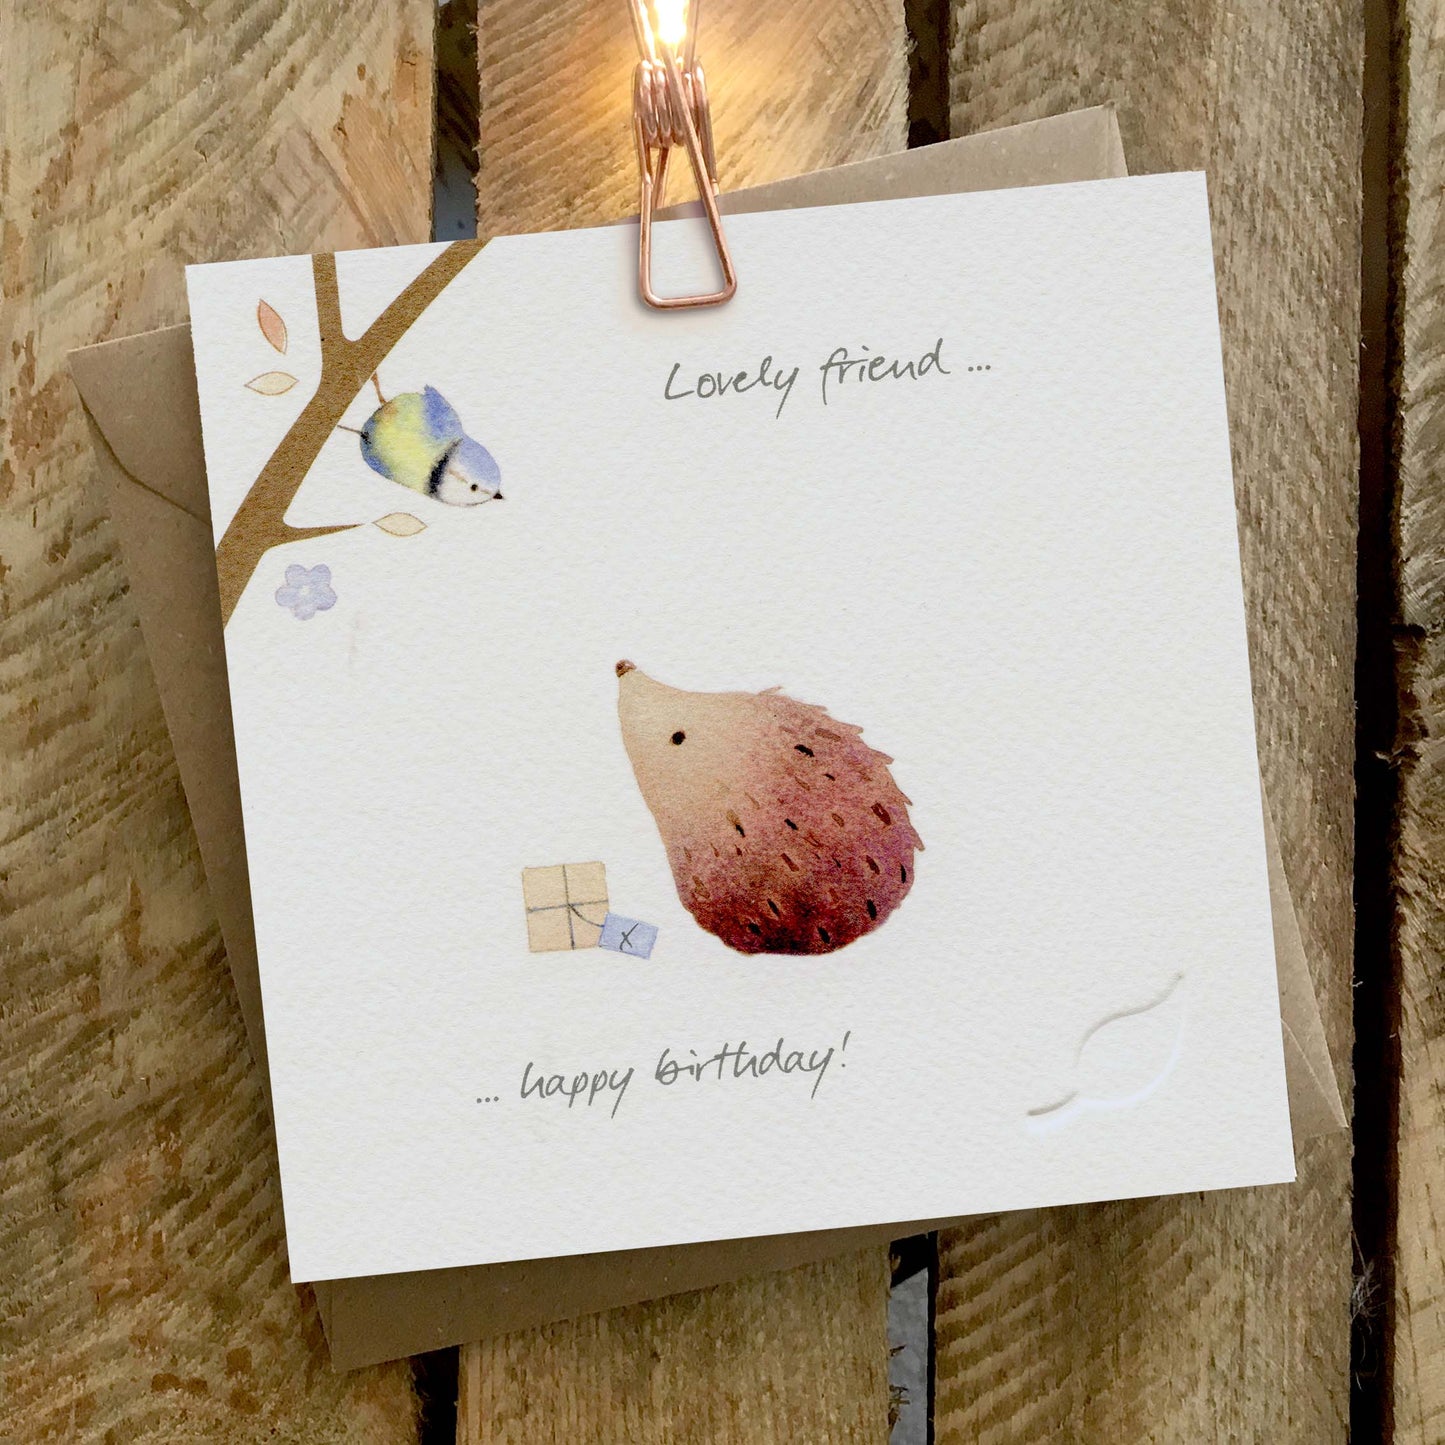 Lovely Friend Greetings Card